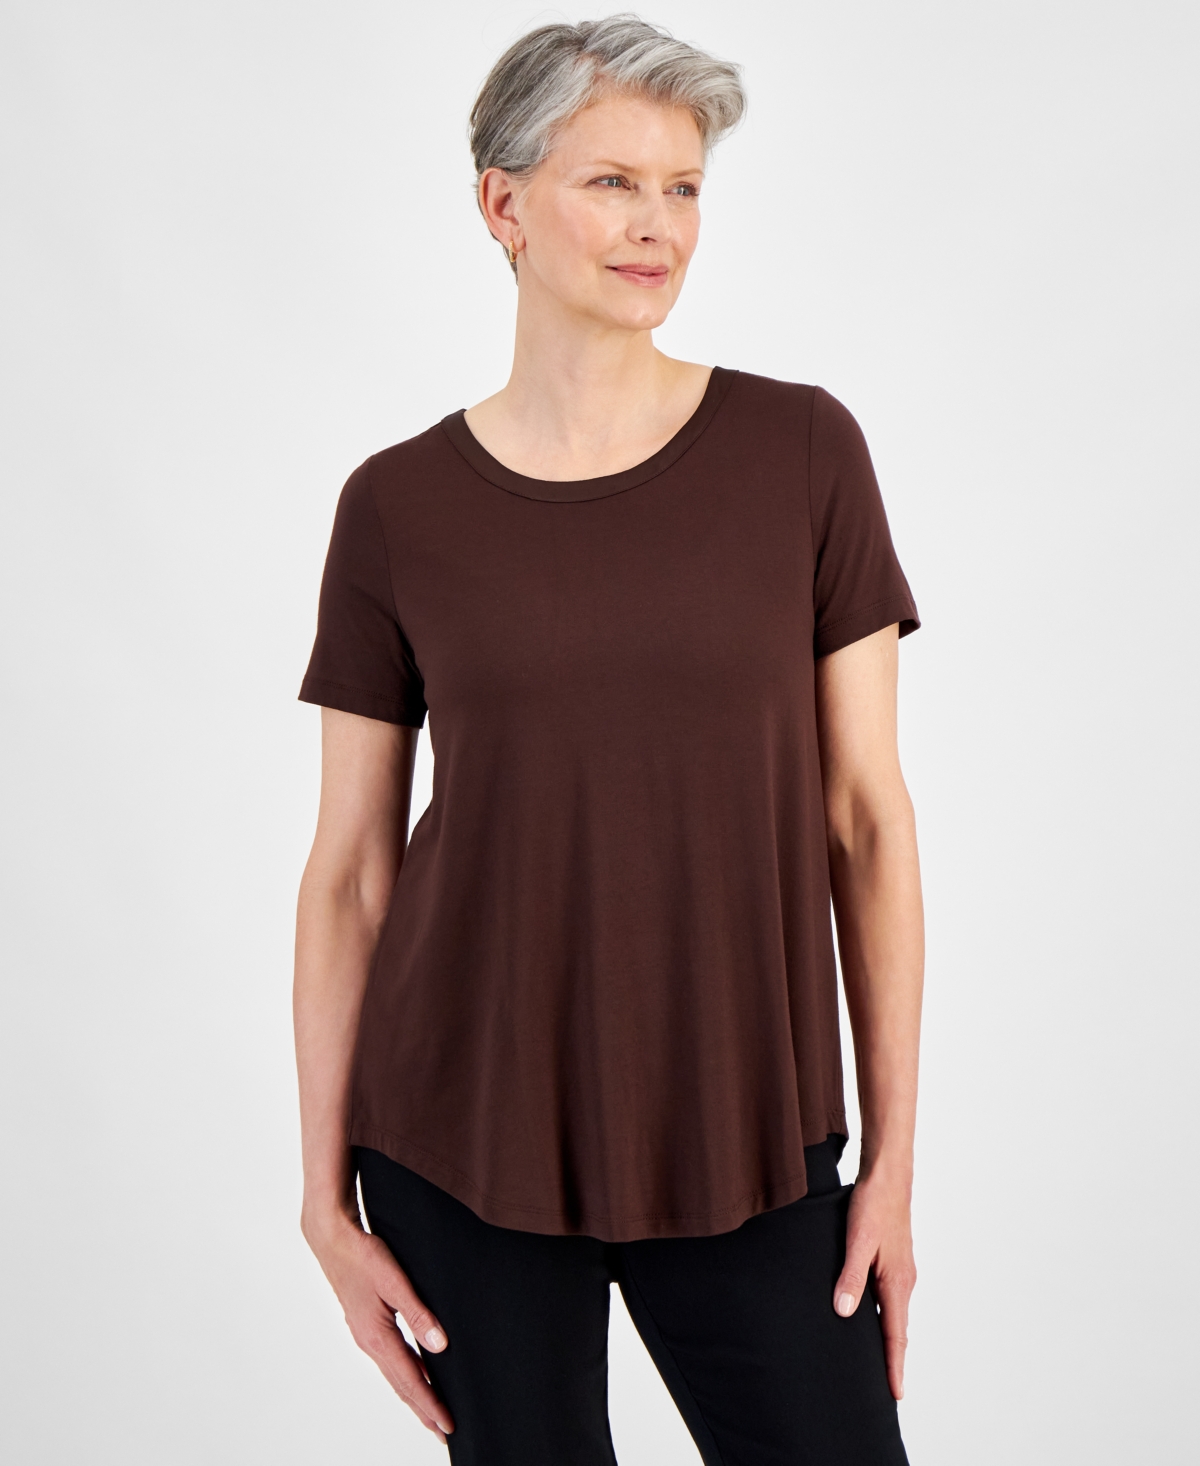 Women's Satin-Trim Knit Short-Sleeve Top, Created for Macy's - Blossom Berry